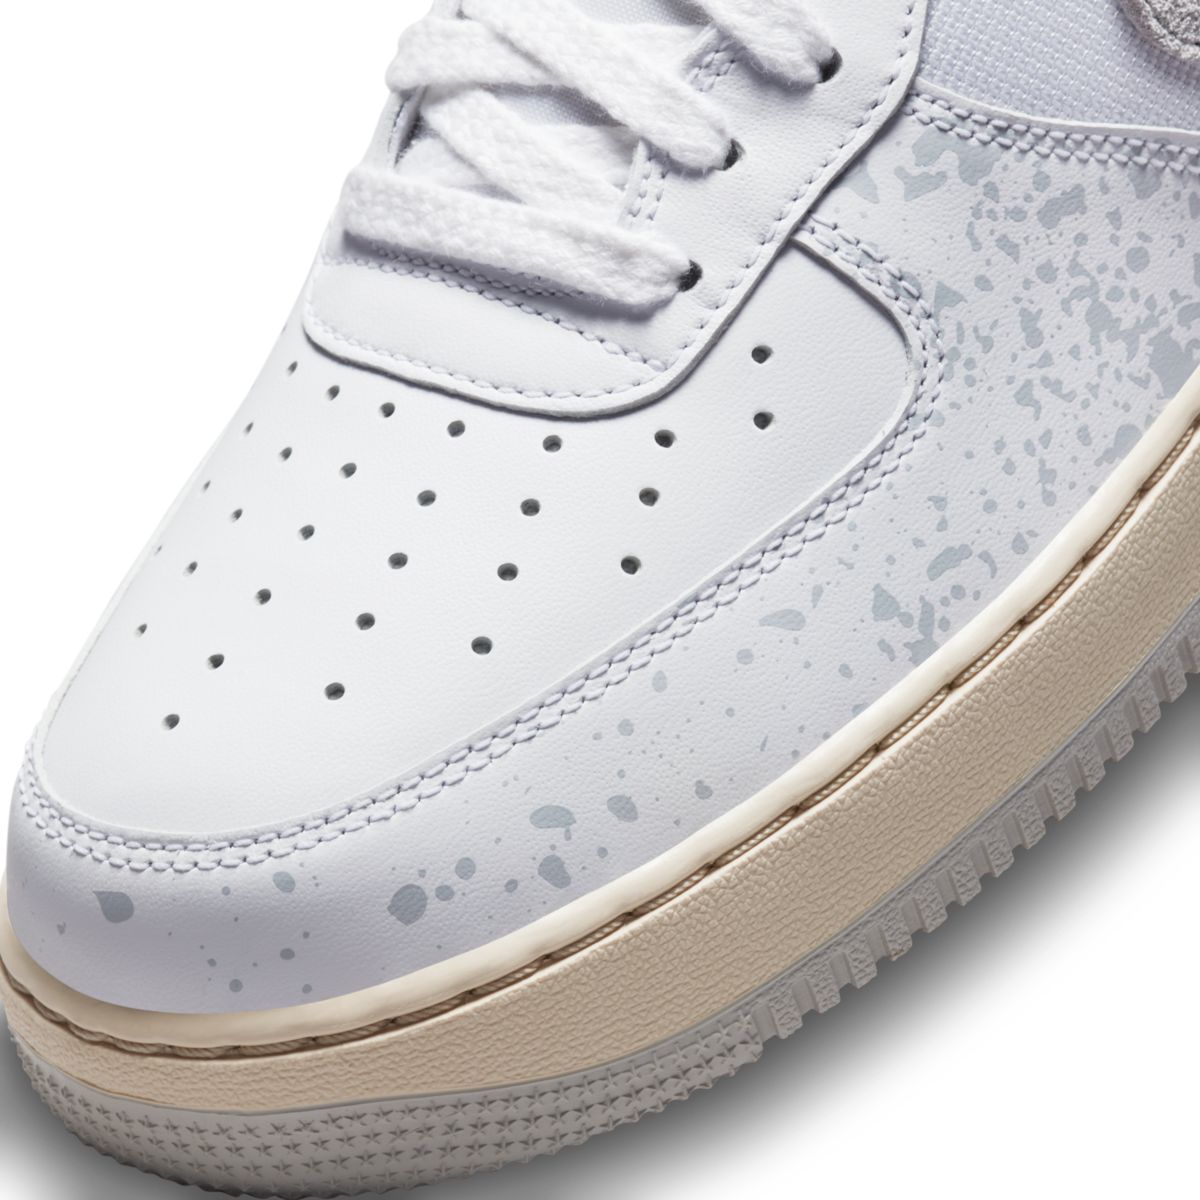 Nike Air Force 1 Low Spray Paint FD9758-100 7